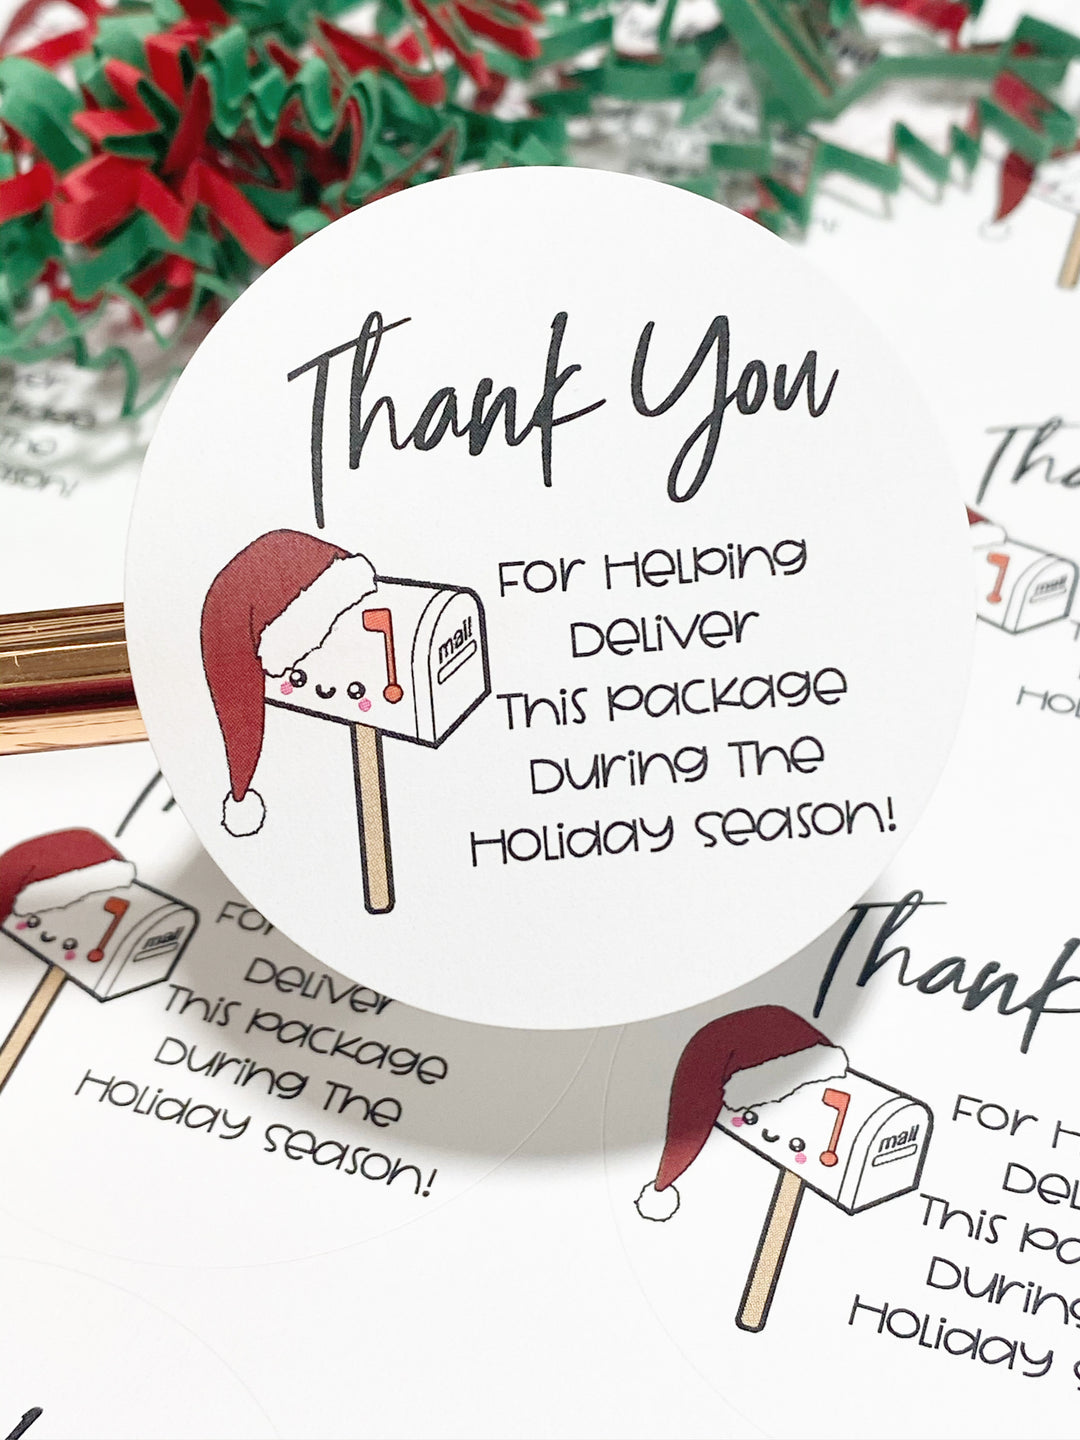 Thank you For Delivering This Holiday Season MailBox |  Packaging Stickers | Business Branding | Small Shop Stickers | Sticker #: S0111 | Ready To Ship